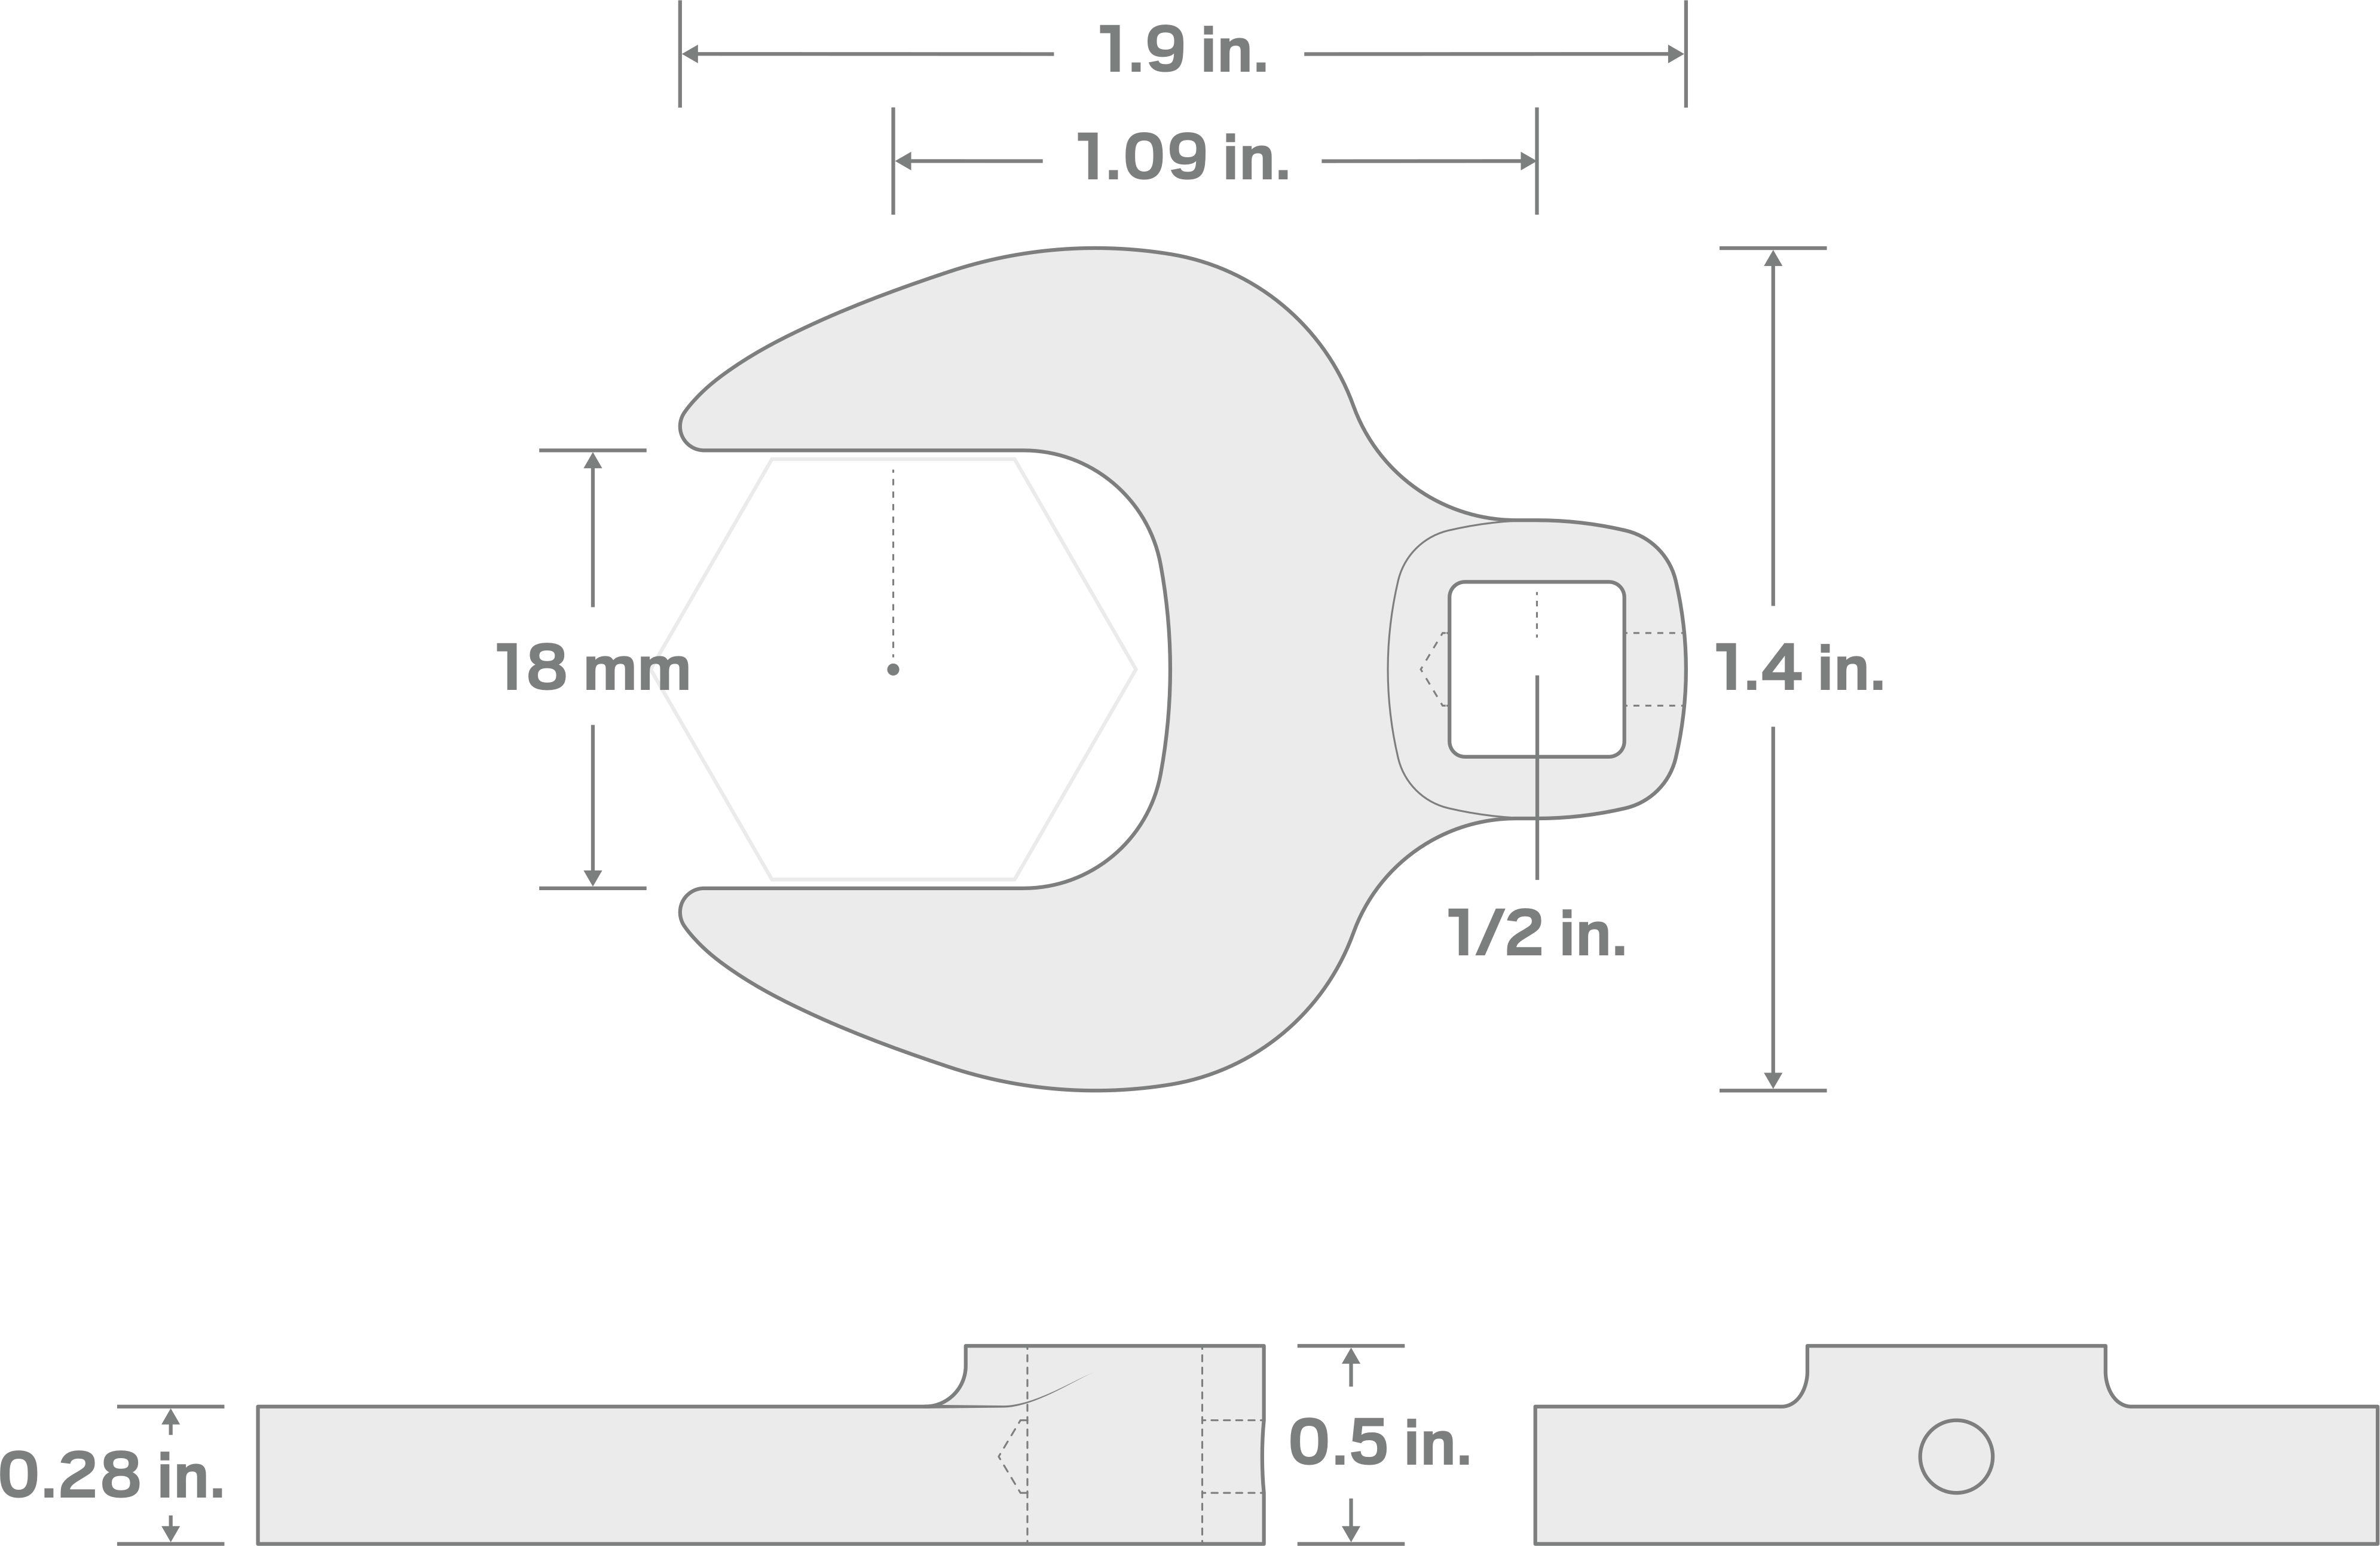 Specs for 1/2 Inch Drive x 18 mm Crowfoot Wrench